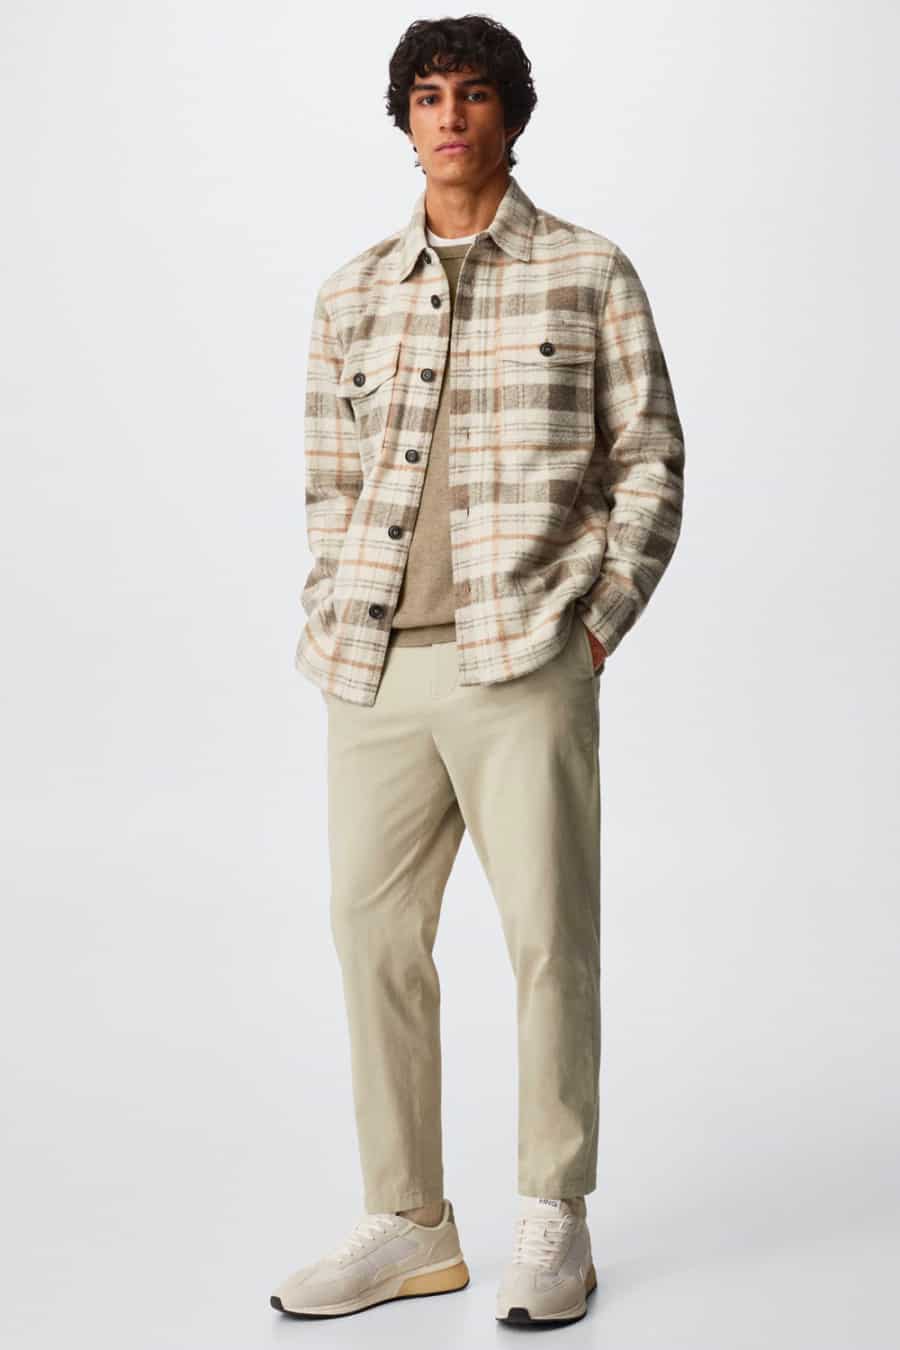 Men's beige chinos, tan sweater, beige flannel check shirt and white sneakers outfit